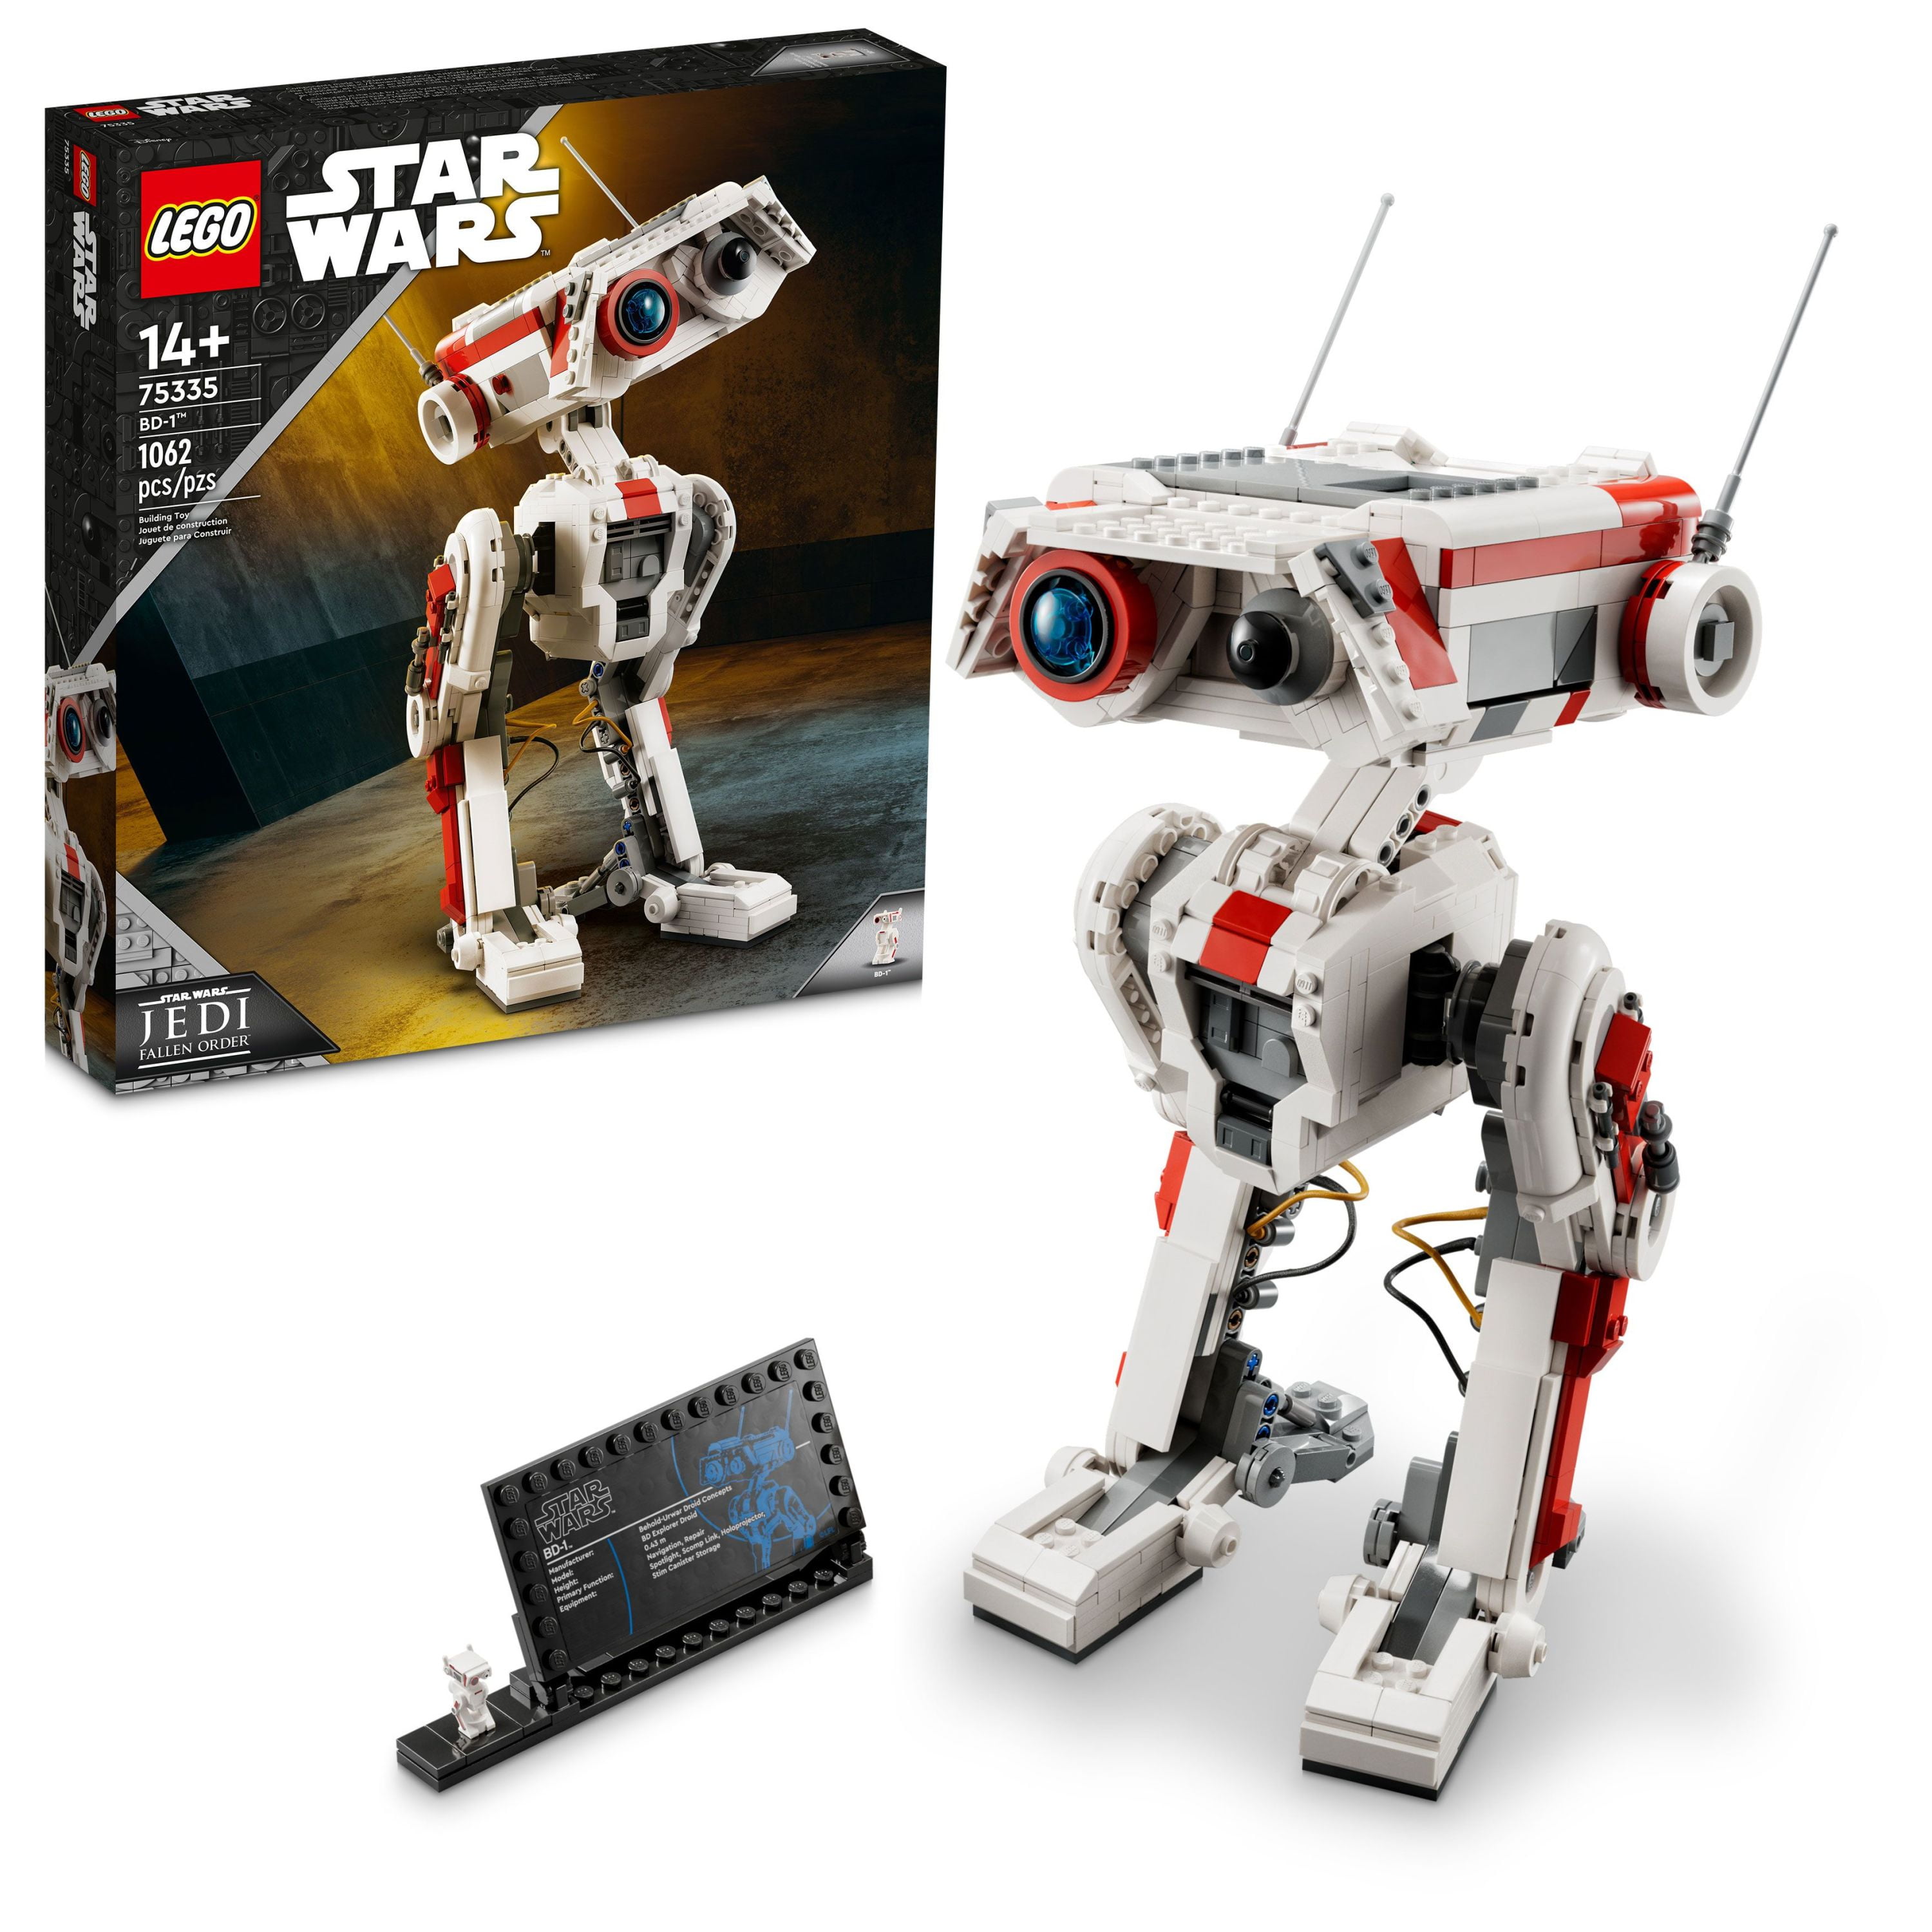 LEGO Wars 75335 Posable Droid Figure Model Building Kit, Room Decoration, Memorabilia Gift for Teenagers from the Jedi: Fallen Order Video Game - Walmart.com